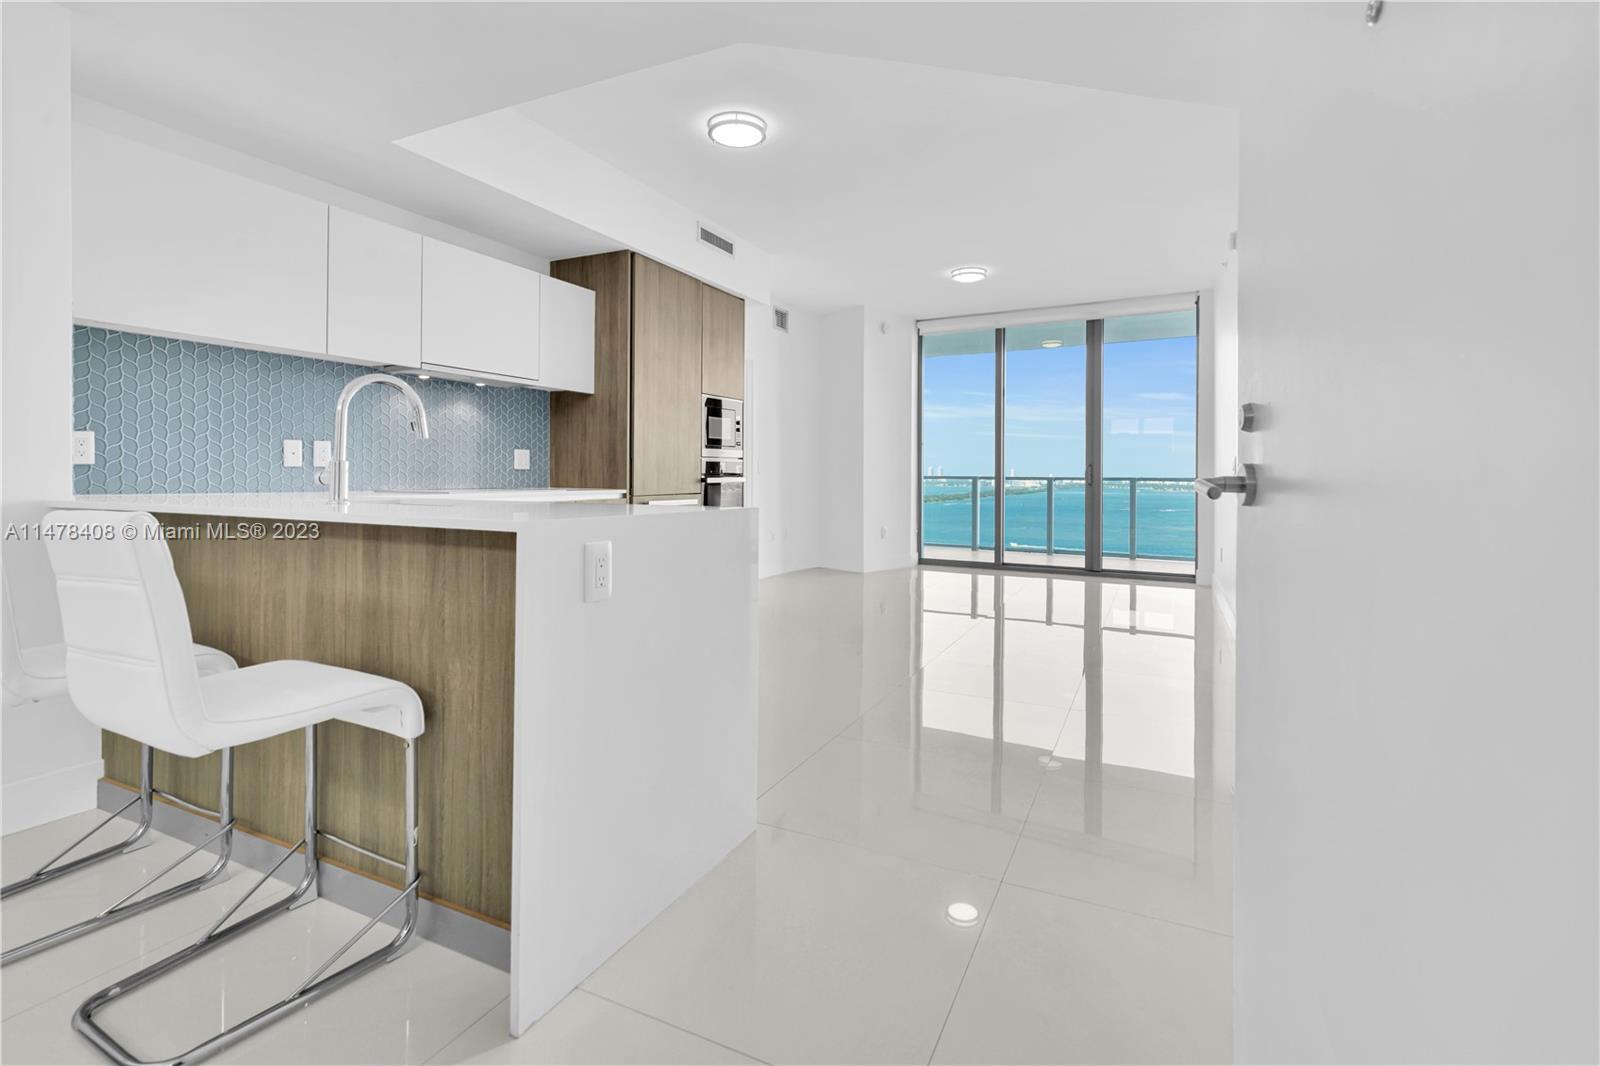 Photo 2 of Biscayne Beach Biscayne Apt 2205 in Miami - MLS A11478408